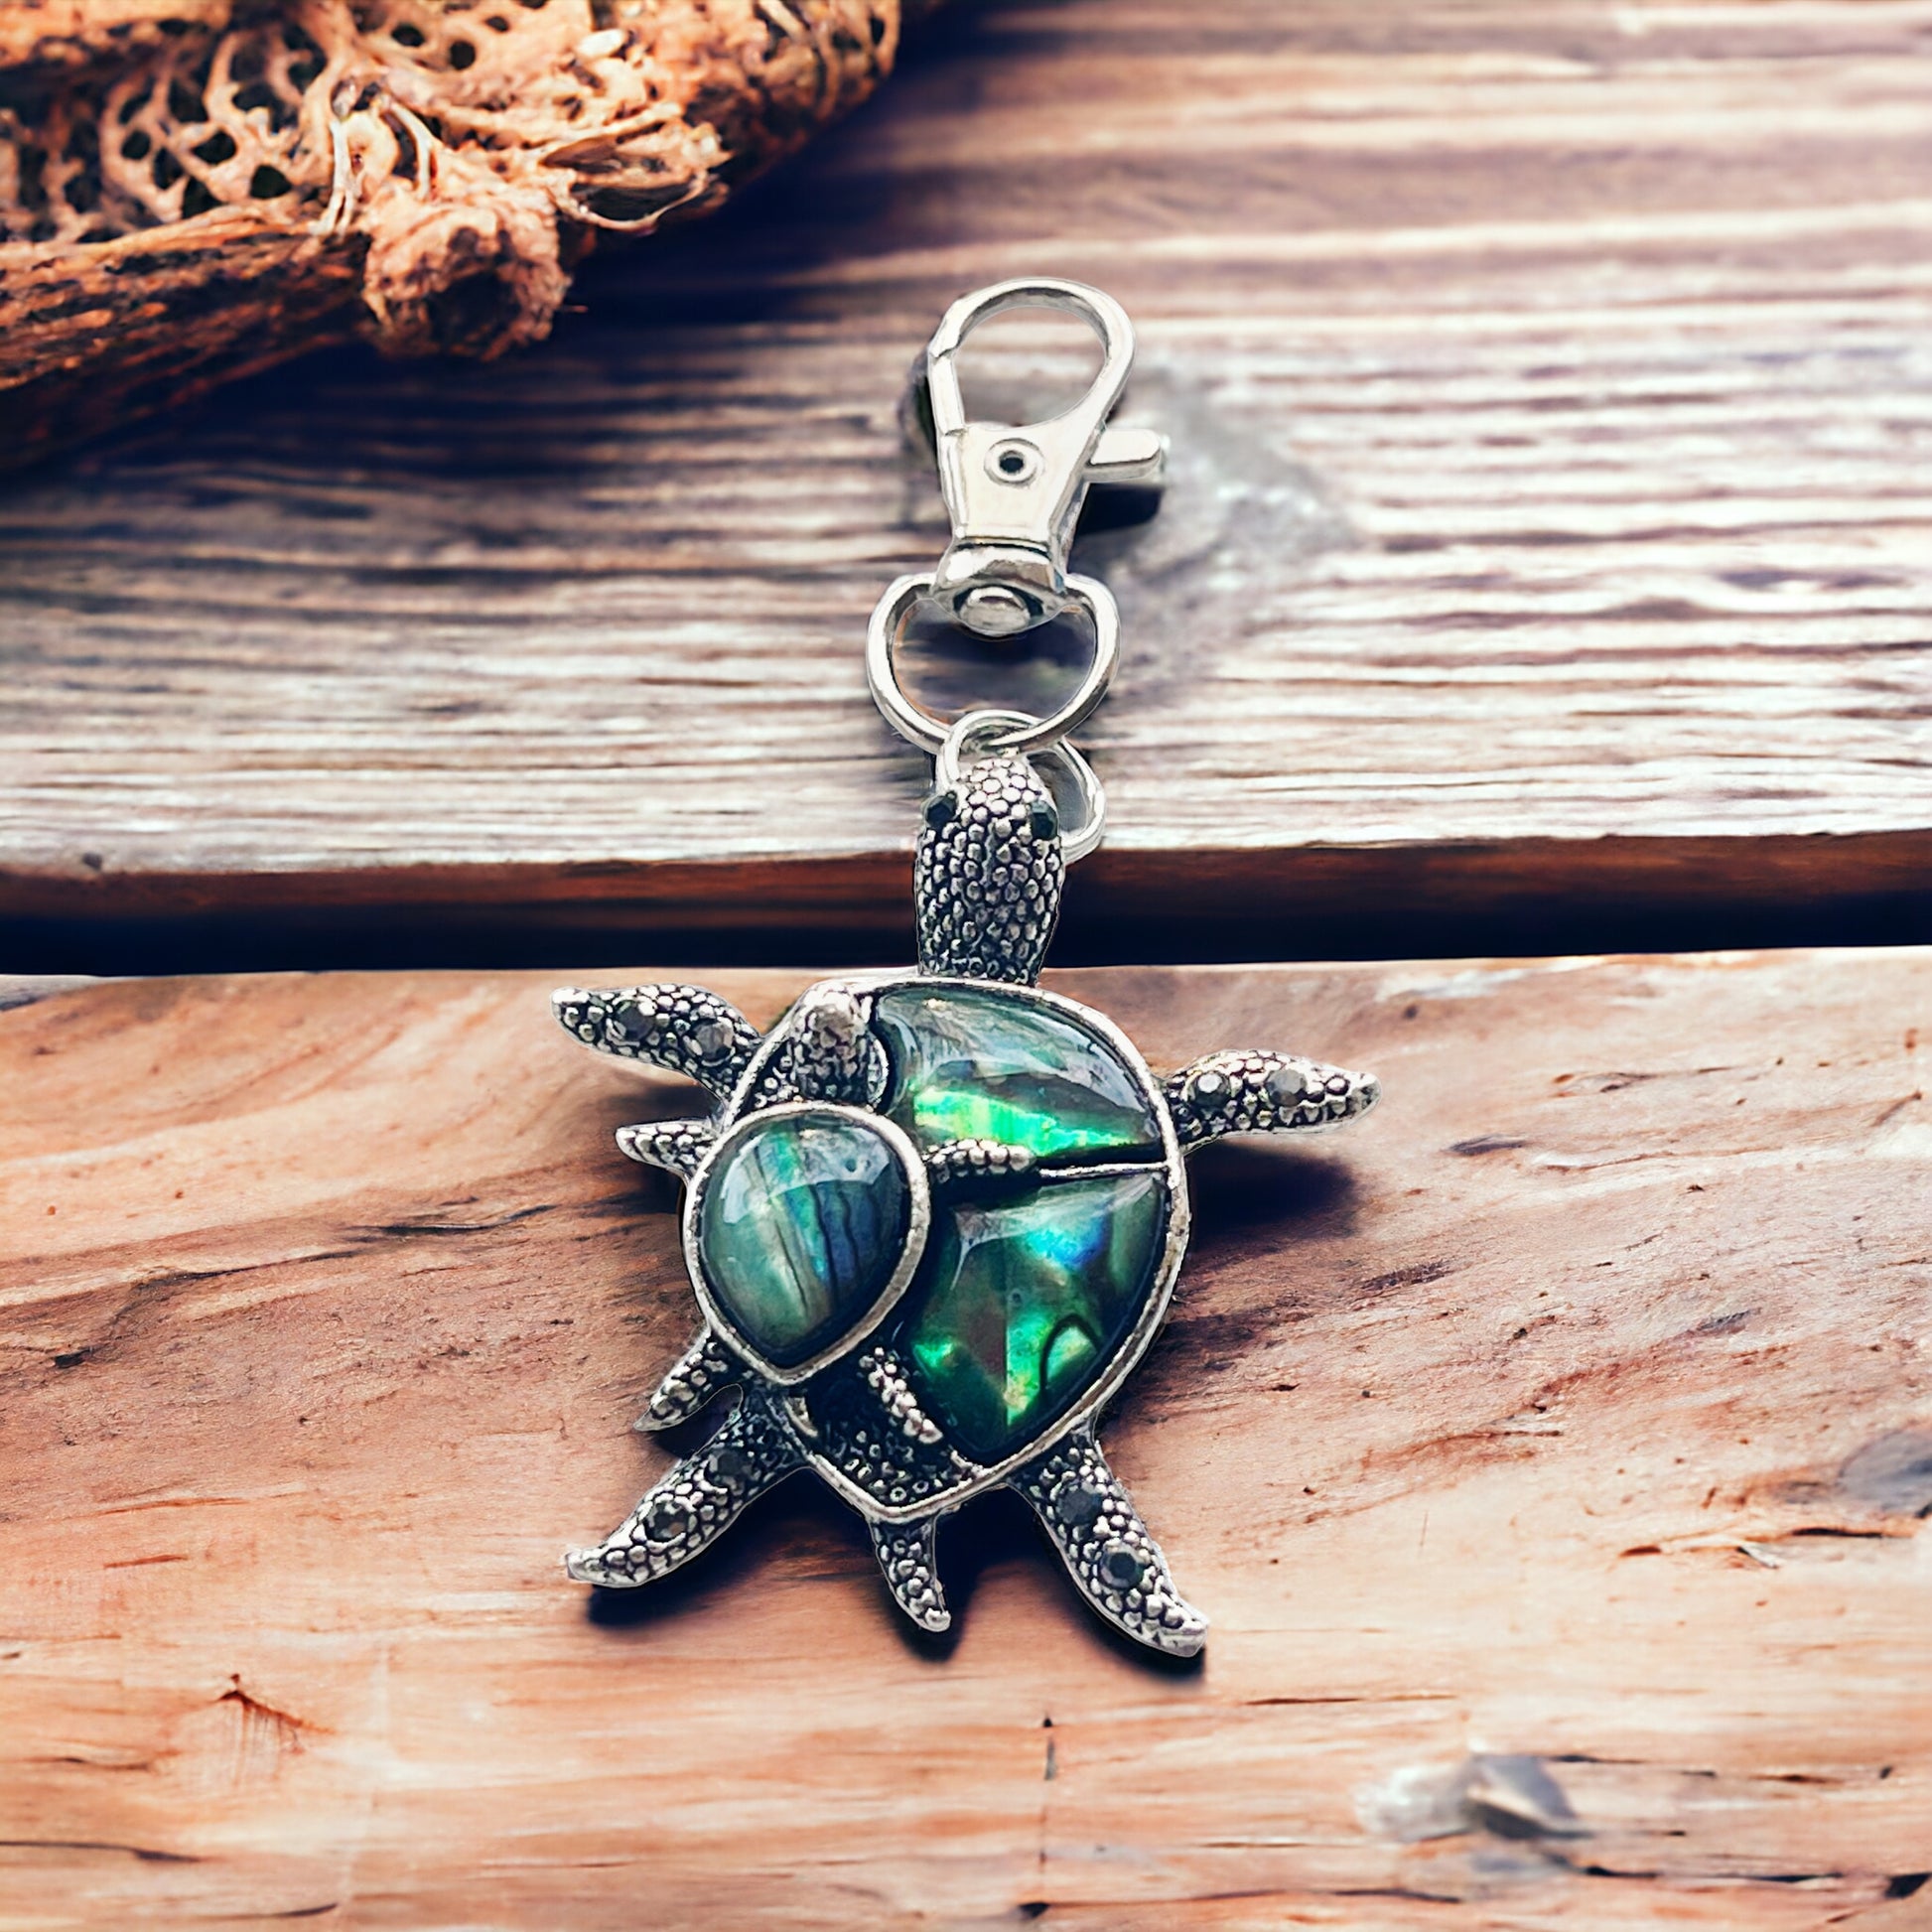 Turtle with Baby Purse Charm with Natural Abalone - Adorable Coastal-Inspired Accessory